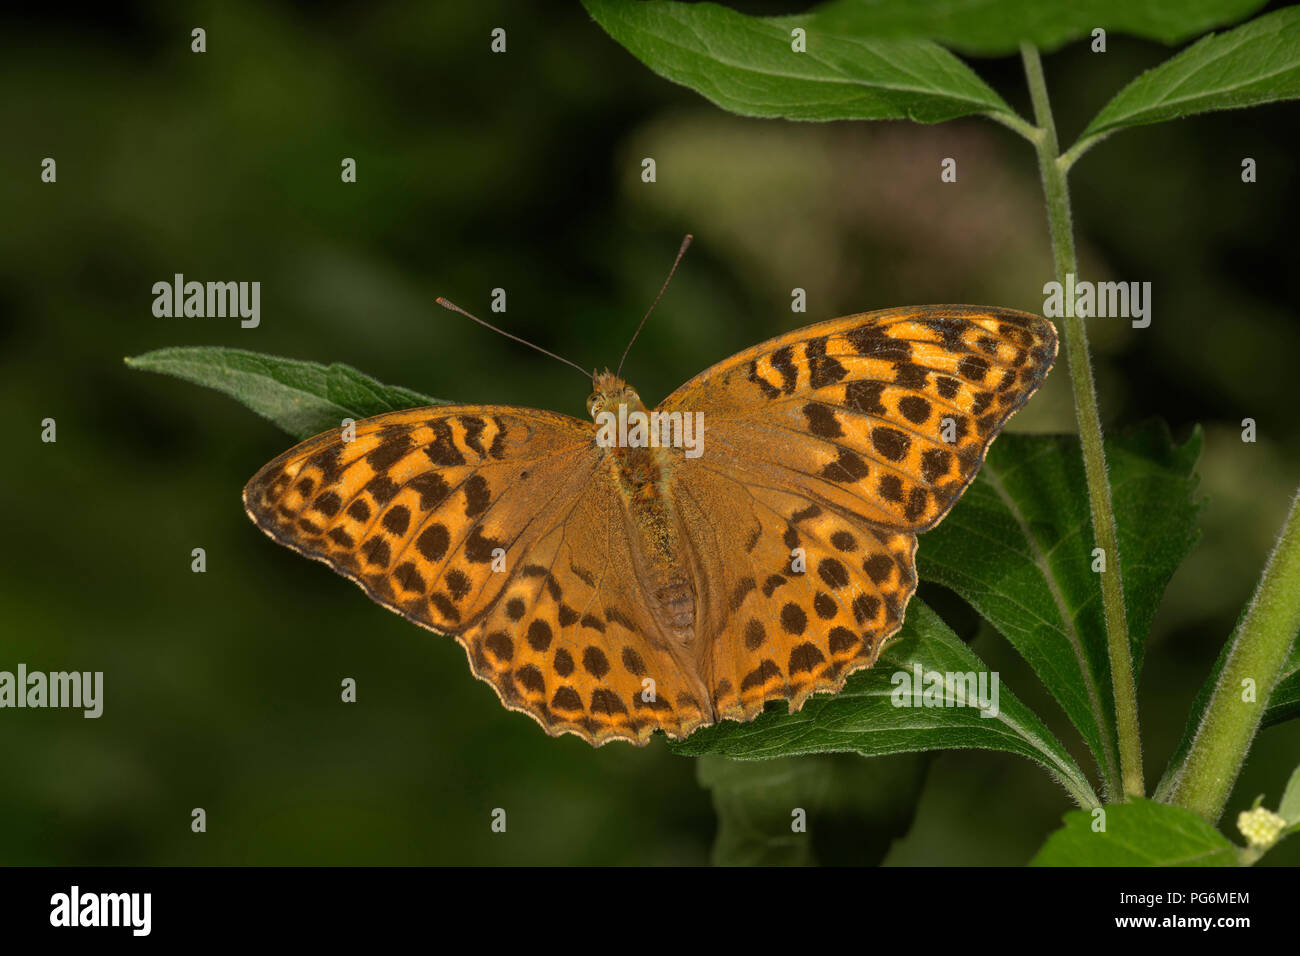 Silver-washed fritillary (Argynnis paphia) with open wings, Baden-Württemberg, Germany Stock Photo